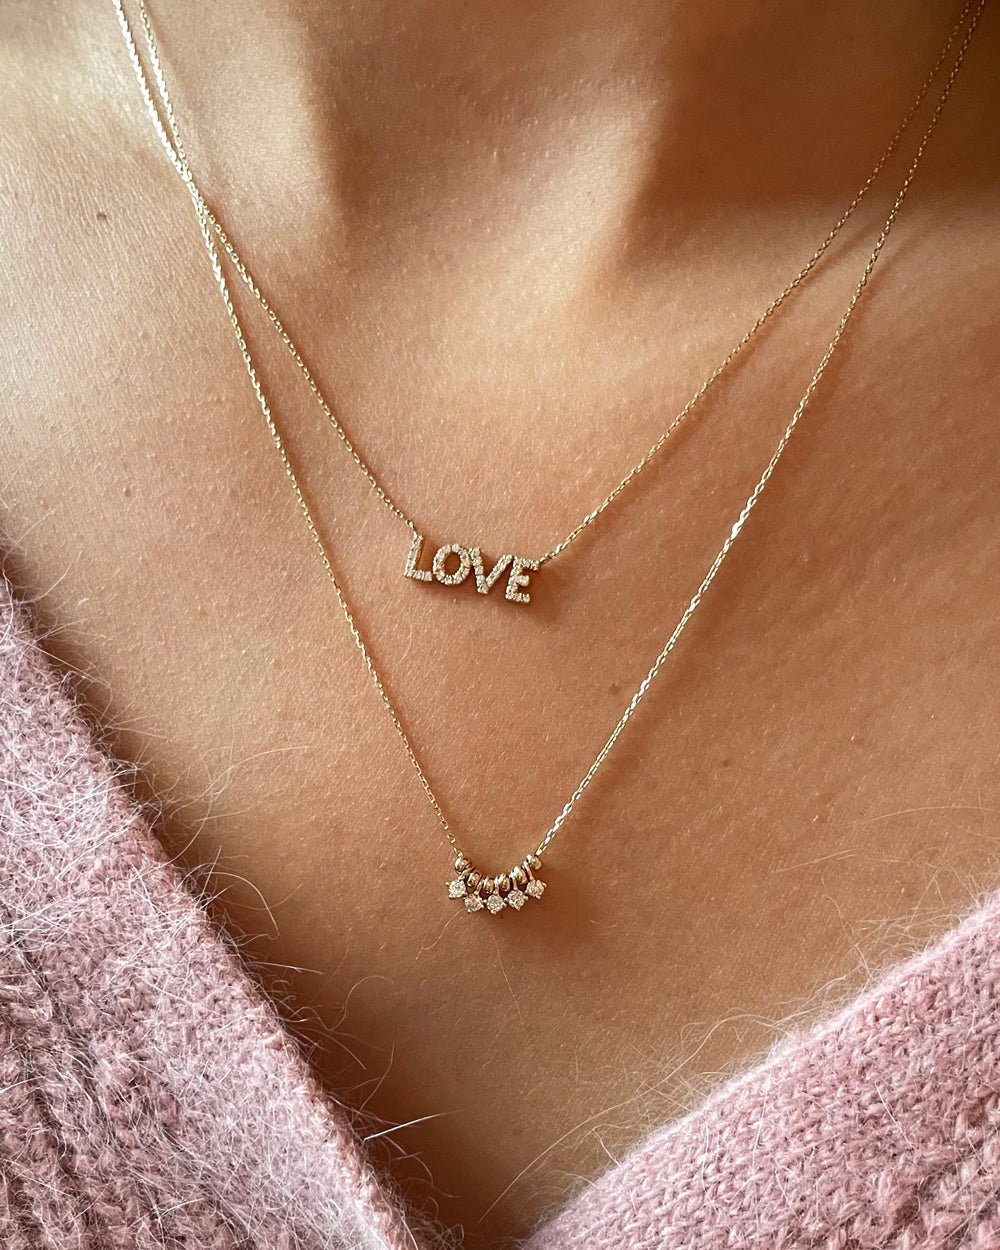 BAYSIDE DIAMOND LOVE NECKLACE - Shop Cupcakes and Cashmere